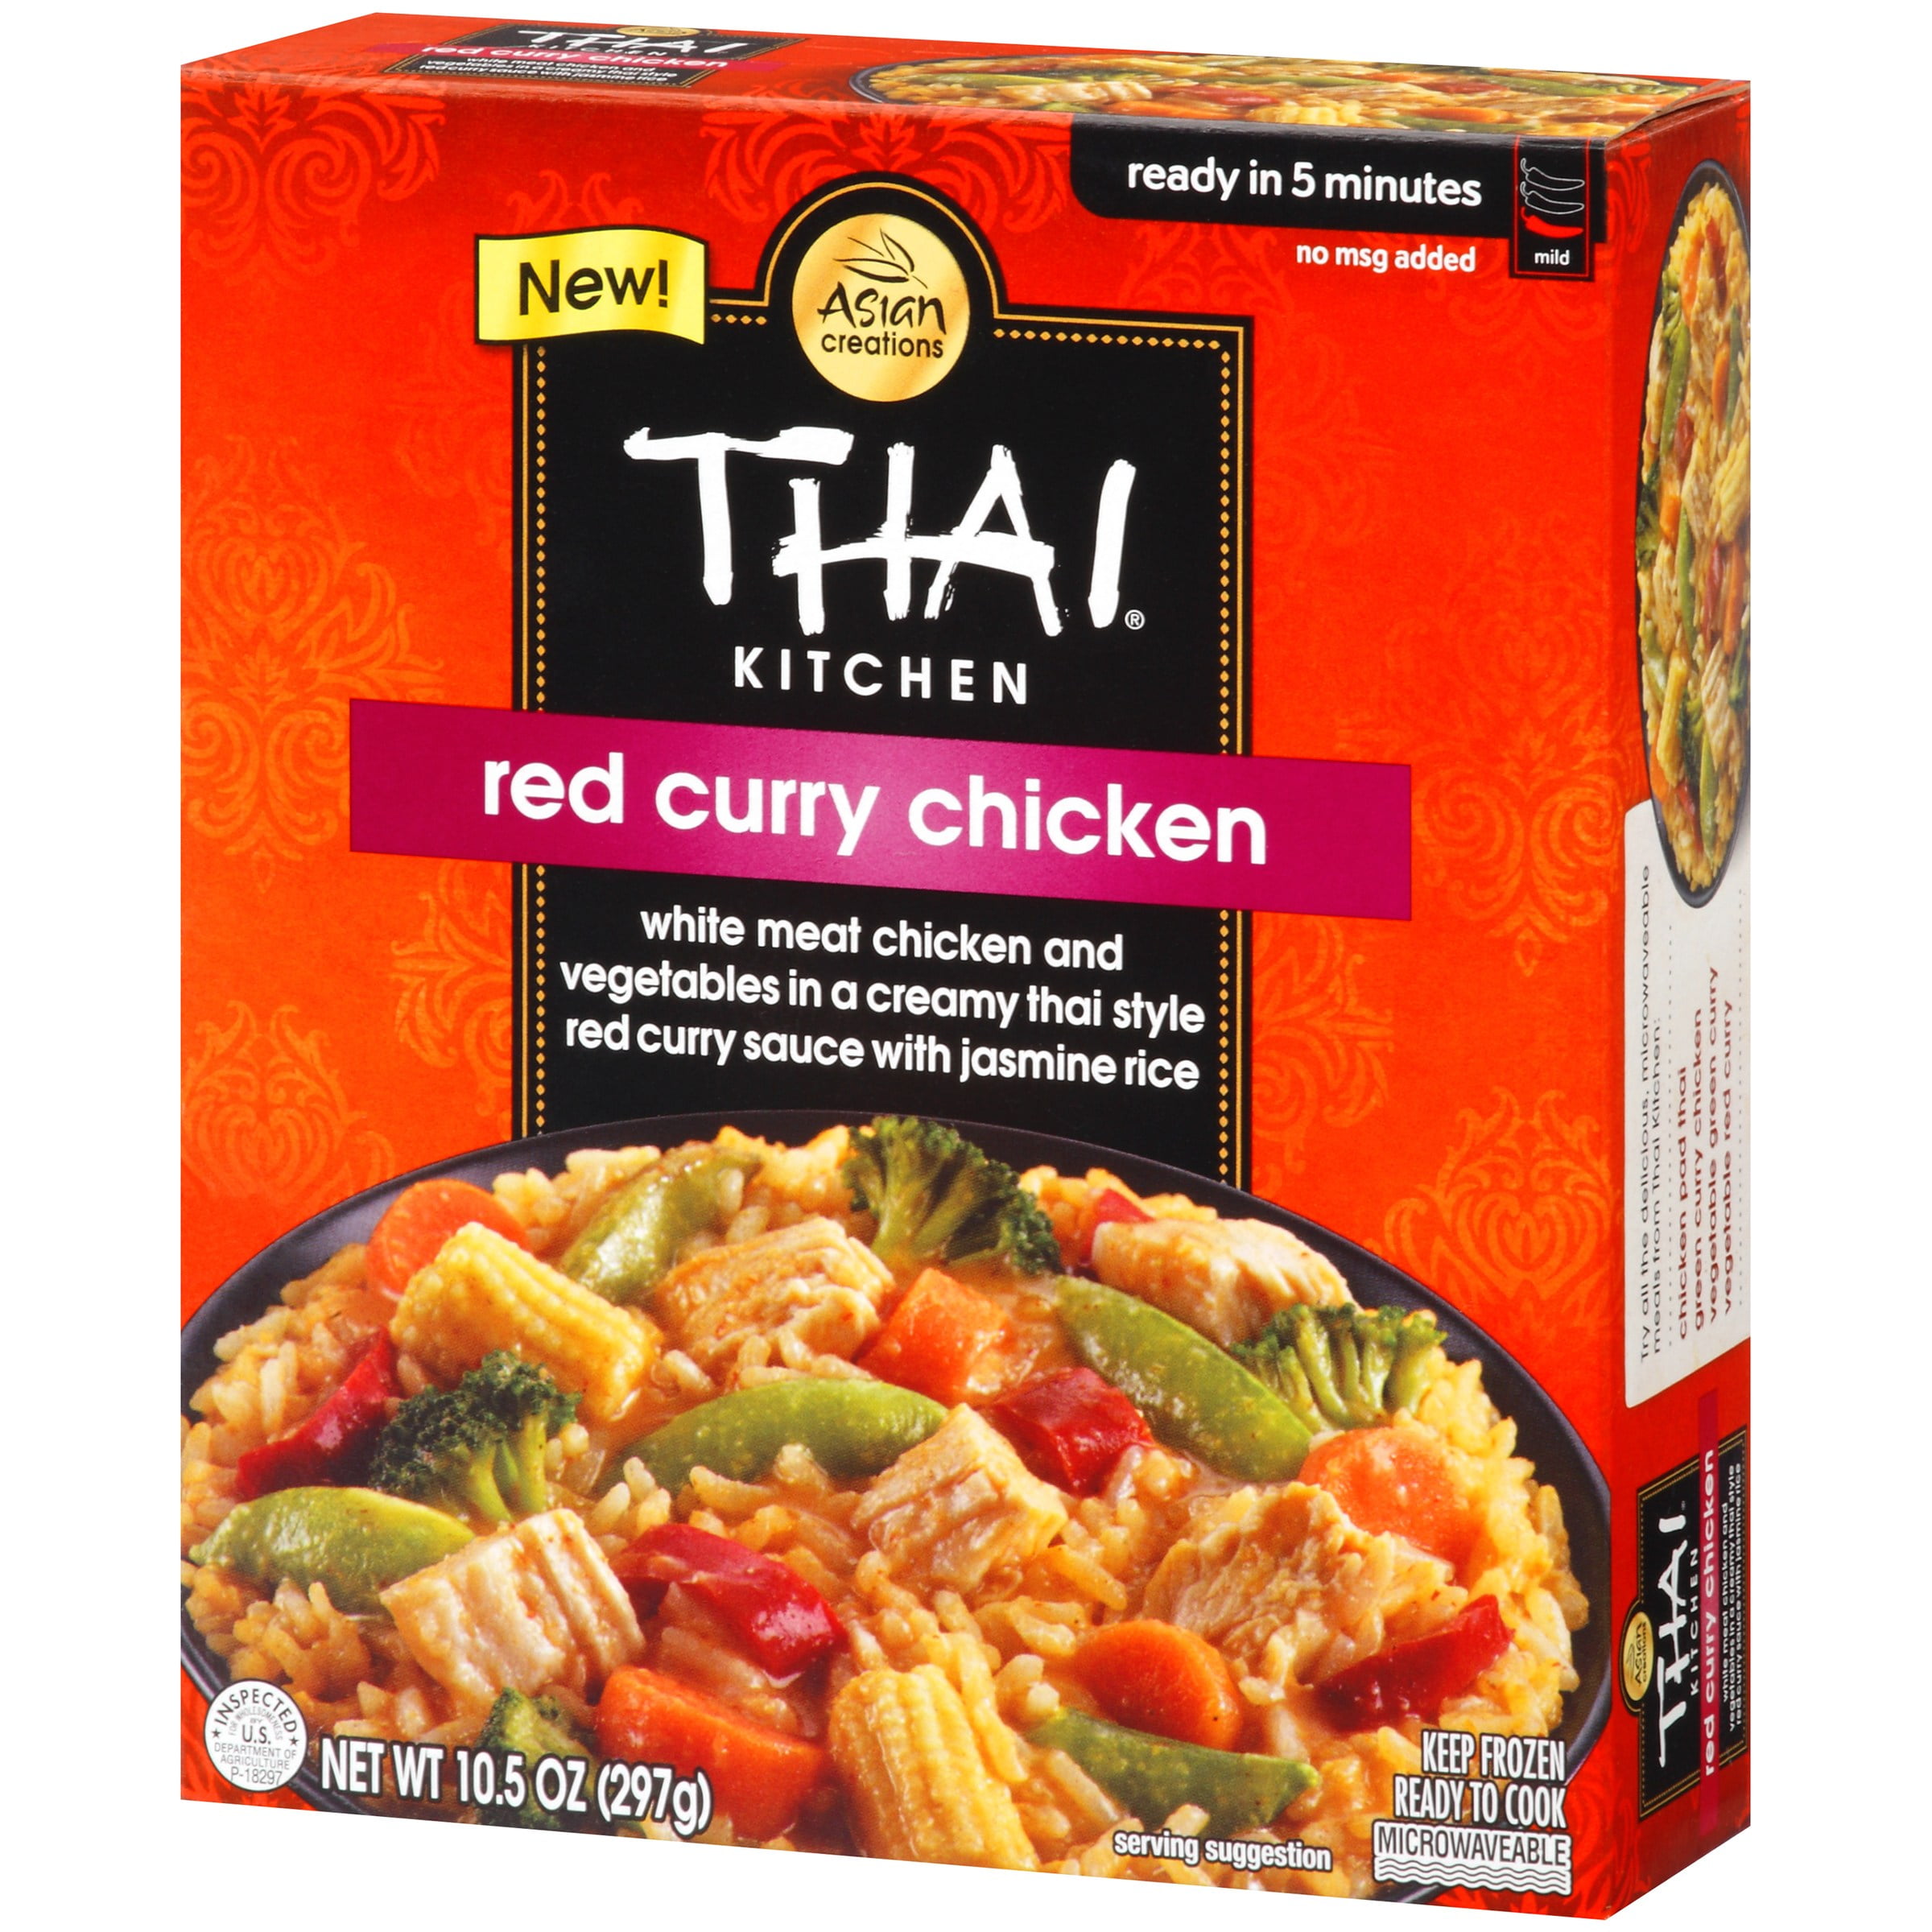 KITCHEN JOY 350G PANANG CURRY-CHICK, Other frozen prepared meals and  part-meals, Frozen Ready Meals, Frozen food, null